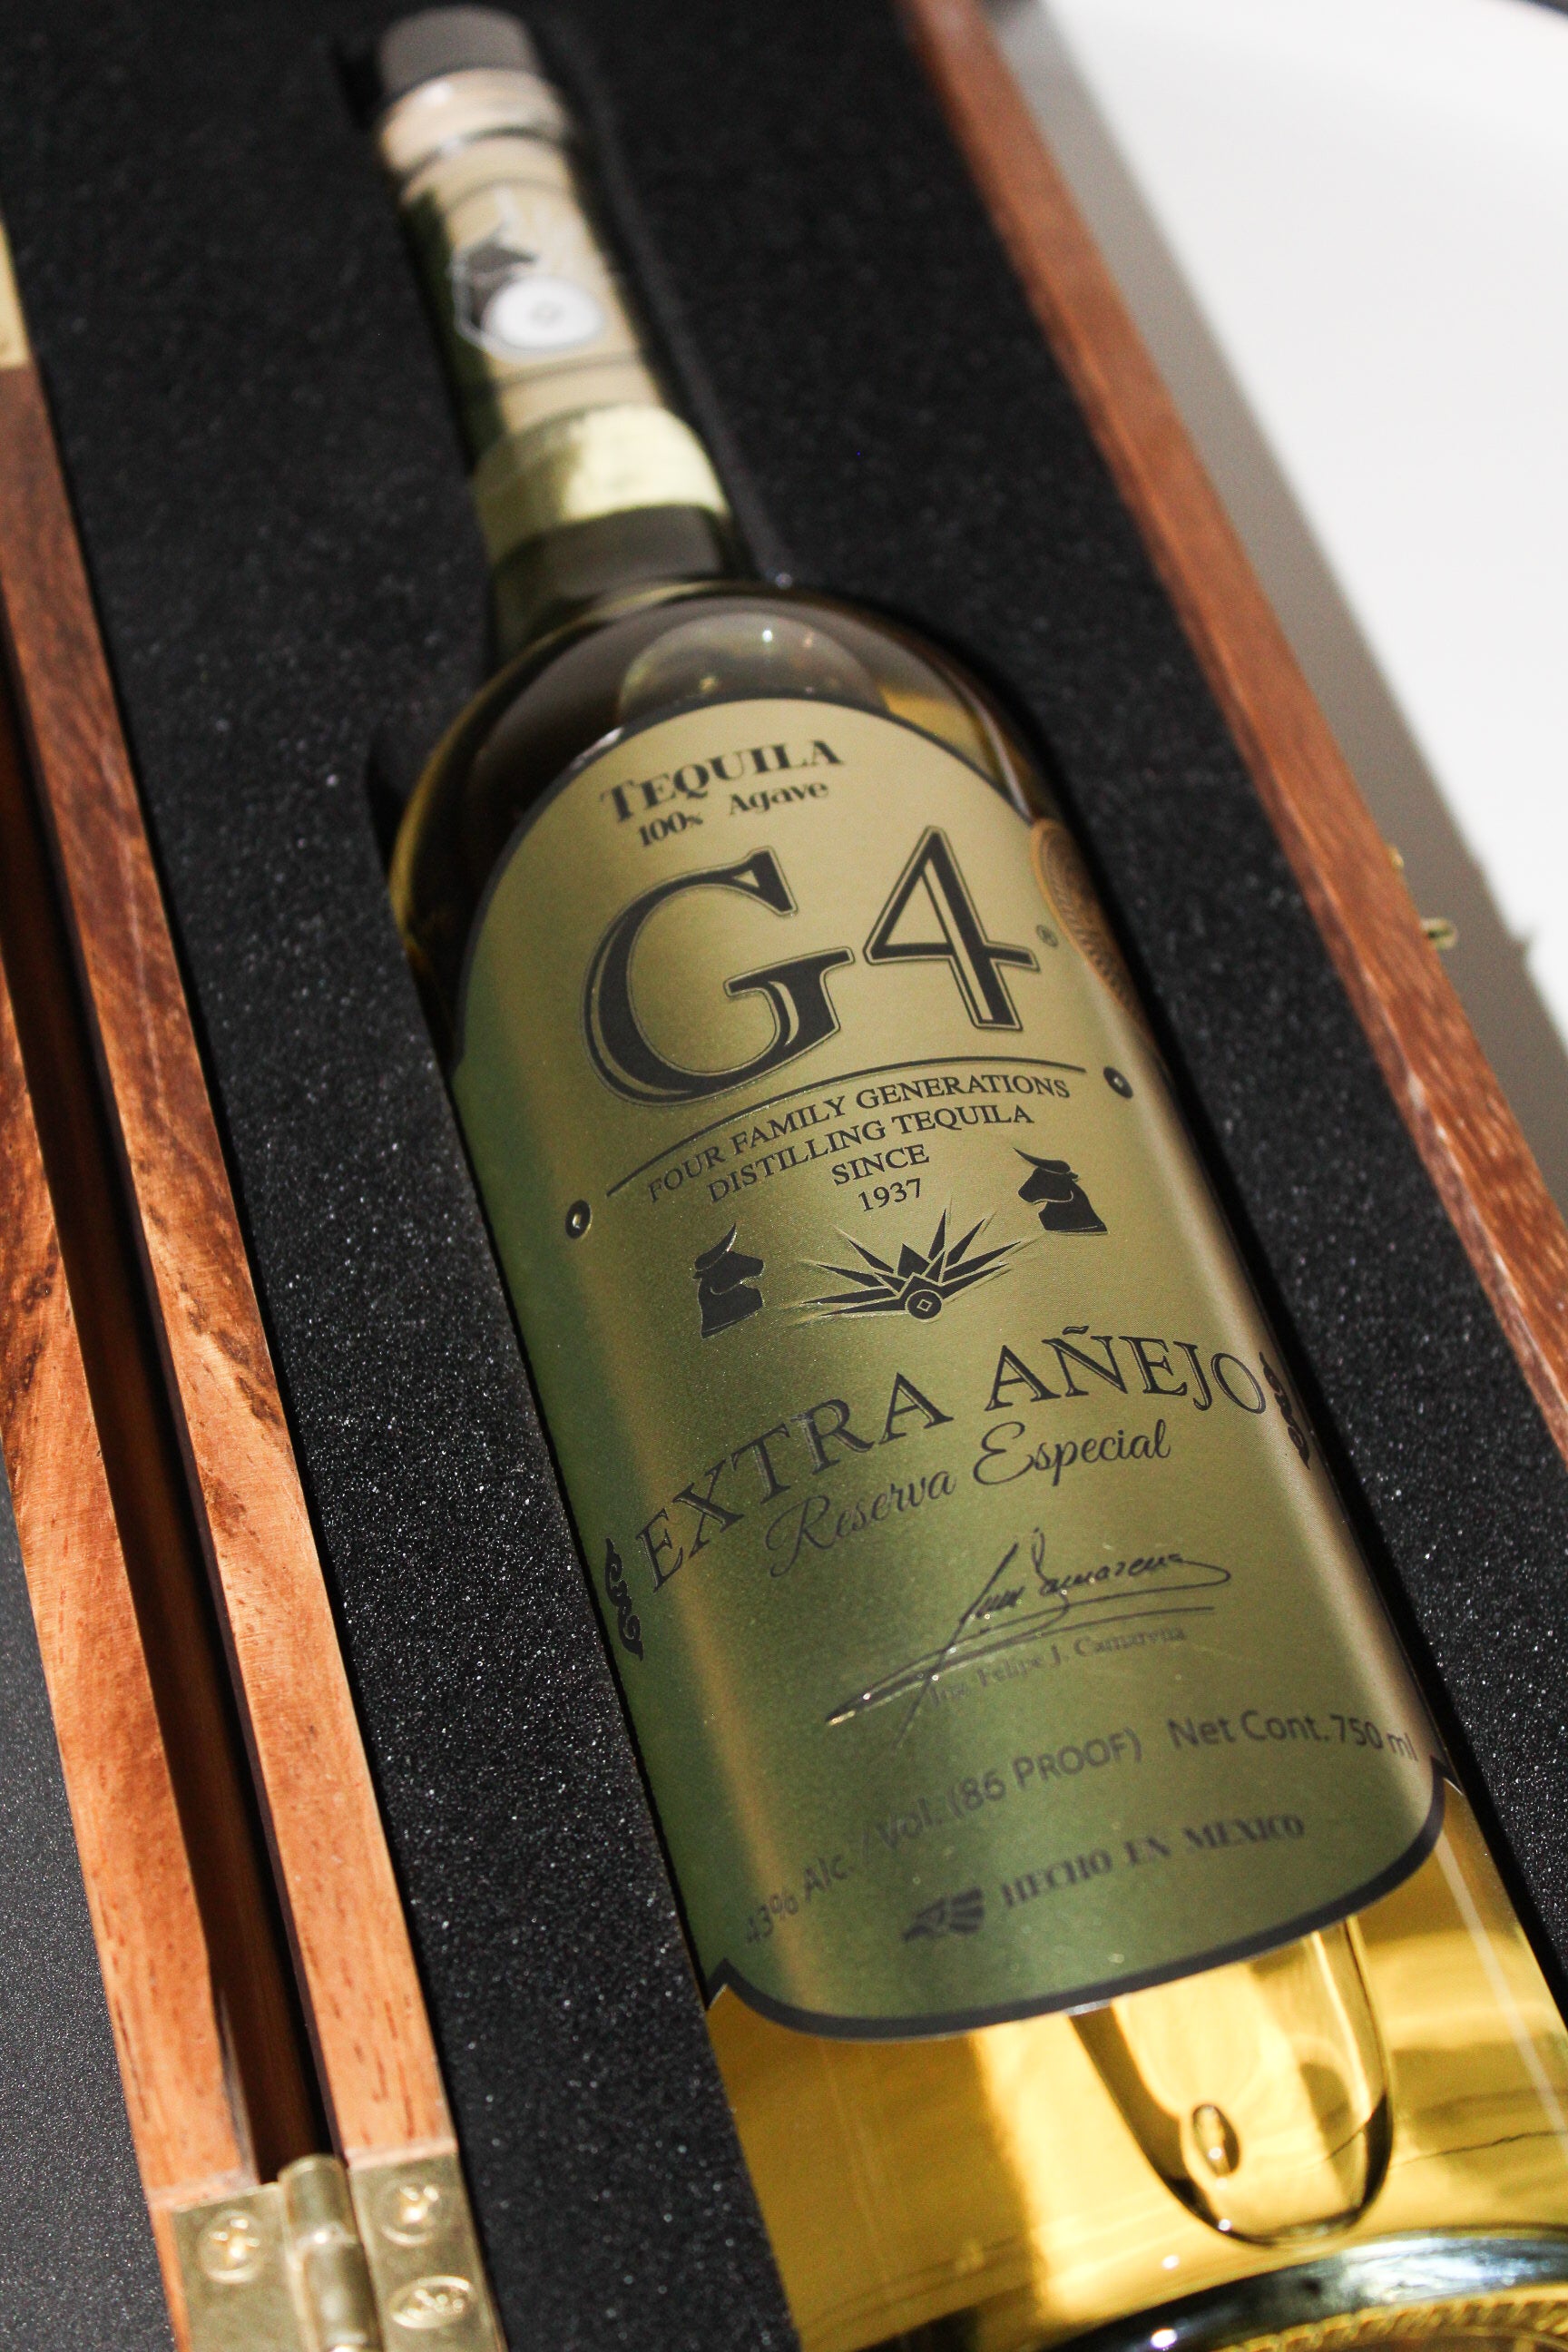 G4 6 Year Extra Anejo Tequila